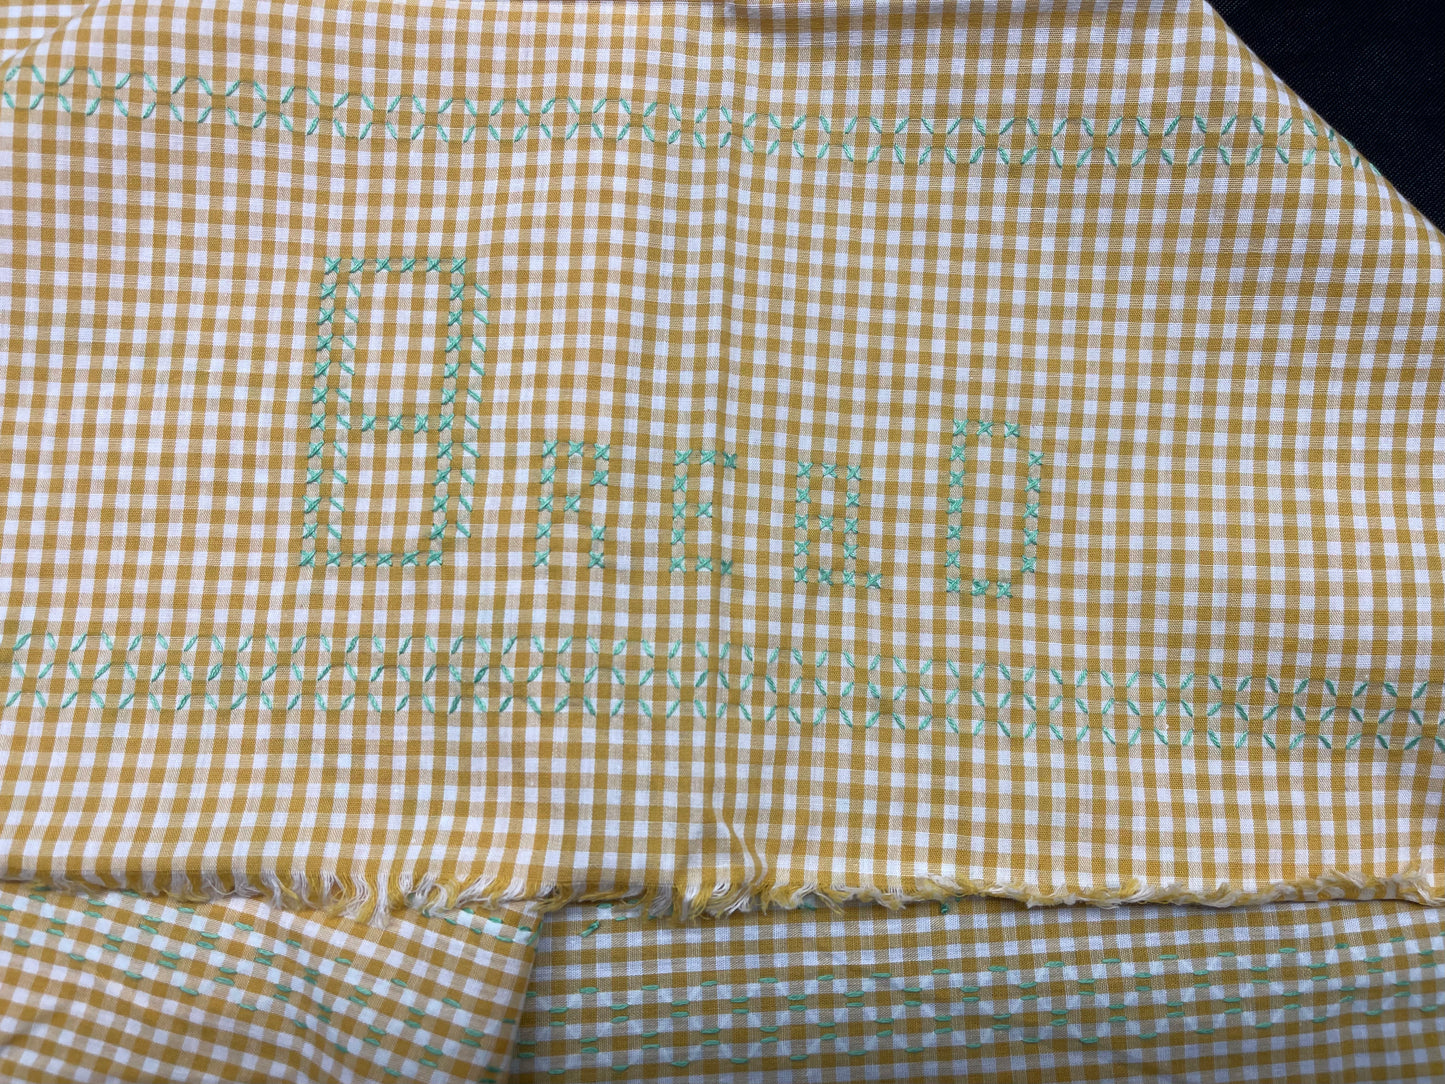 Yellow Gingham Tablecloth with Green Cross Stitch